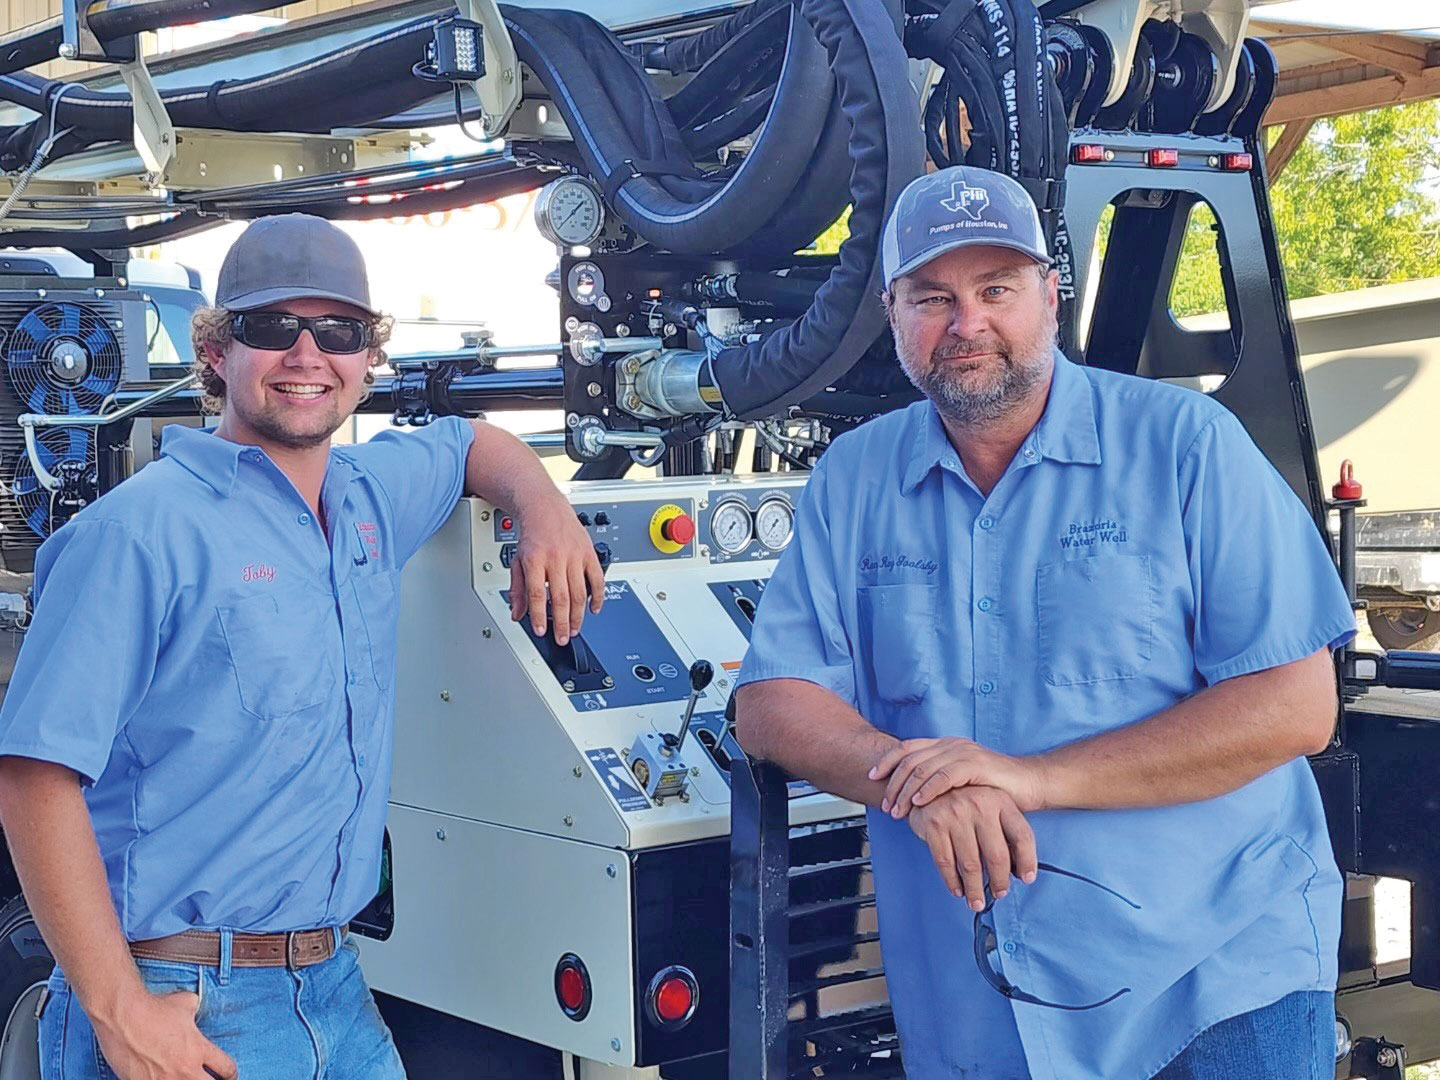 Toby, left, and father Ron, right, appreciate the attention engineers pay to drillers' concerns in designing the DM250.